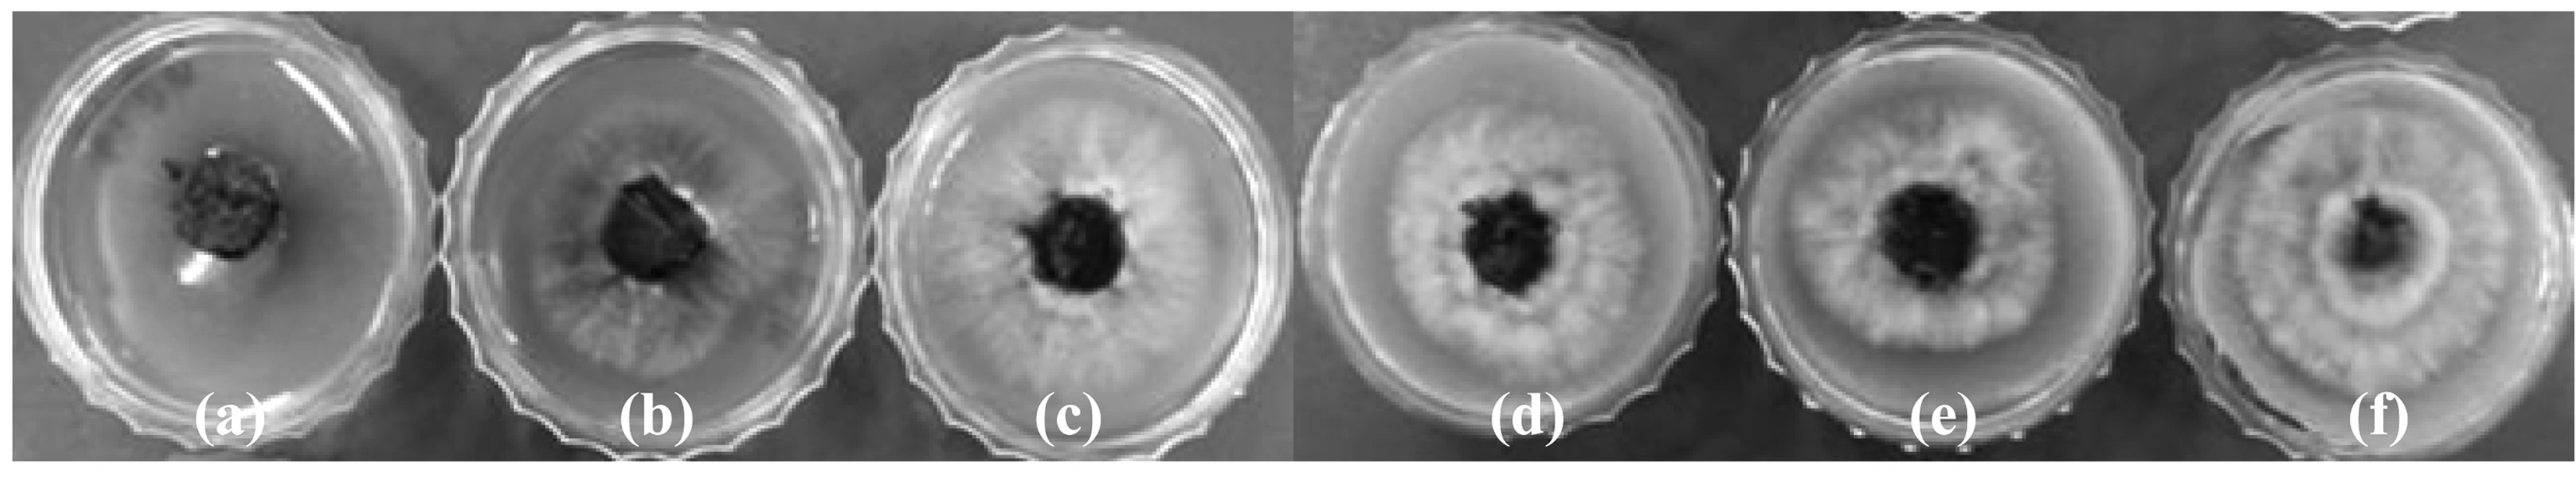 Potential candidates for Coptis fermentation show different growth patterns according to its contents. Coptis powder with agar medium was applied. The powder amounts were (a) 0.2, (b) 1, (c) 2, (d) 4, (e) 6, and (f) 8%.